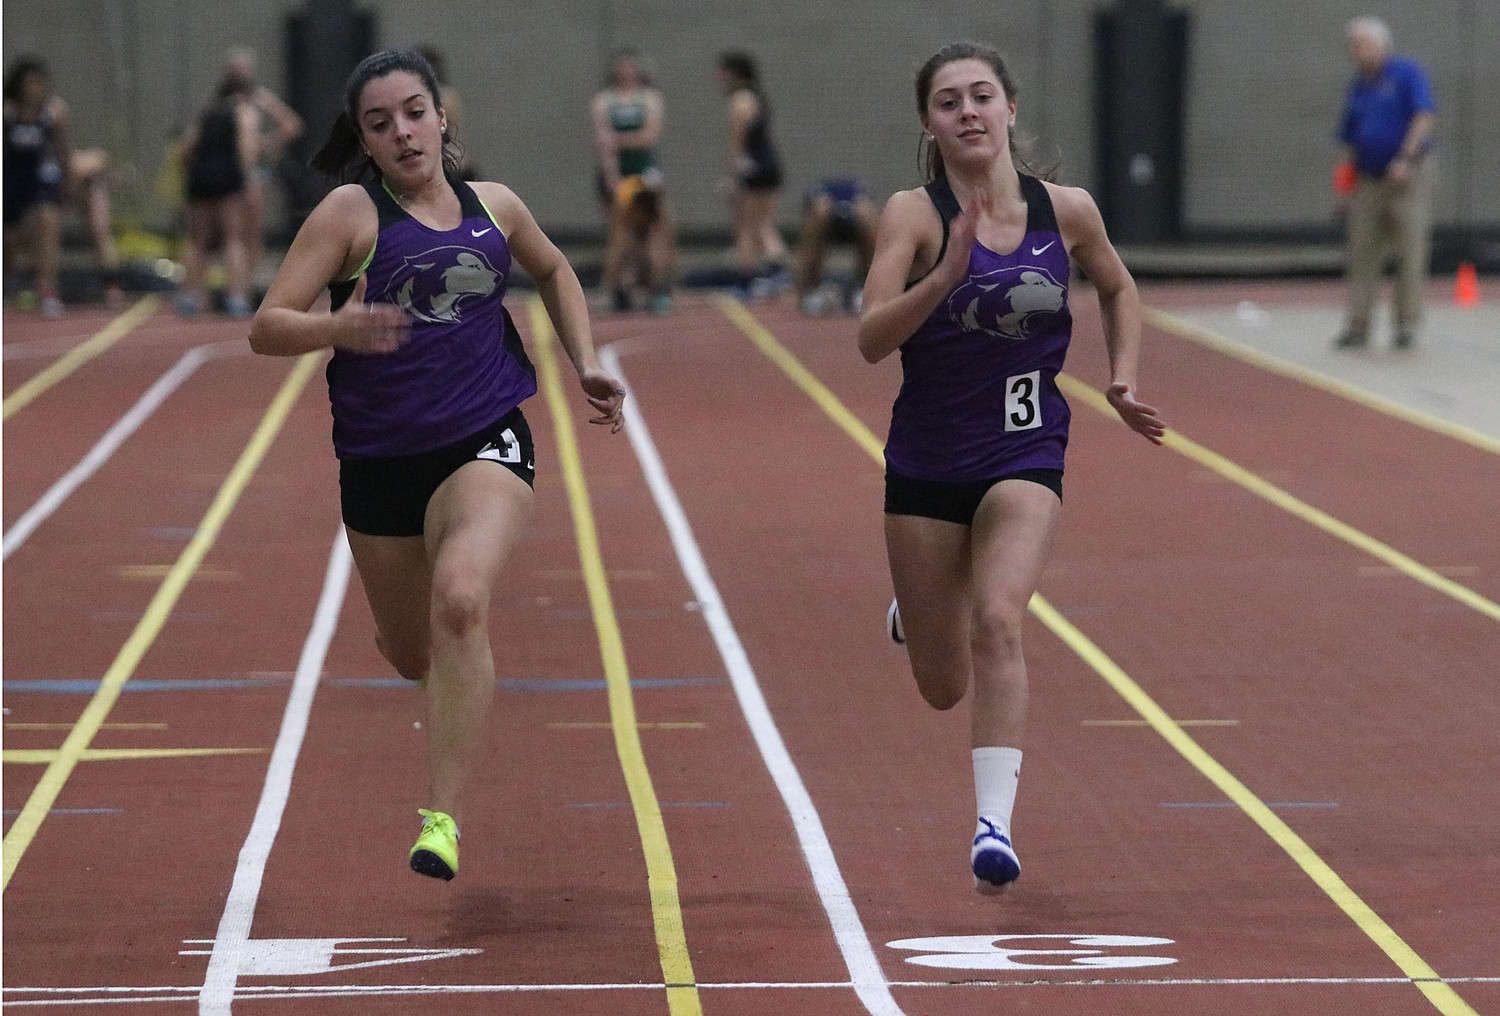 Kelsey Dias (left) and teammate, Kiley Bouchard race down the track during a 55 meter heat. Dias placed second and Bouchard placed third in the event.